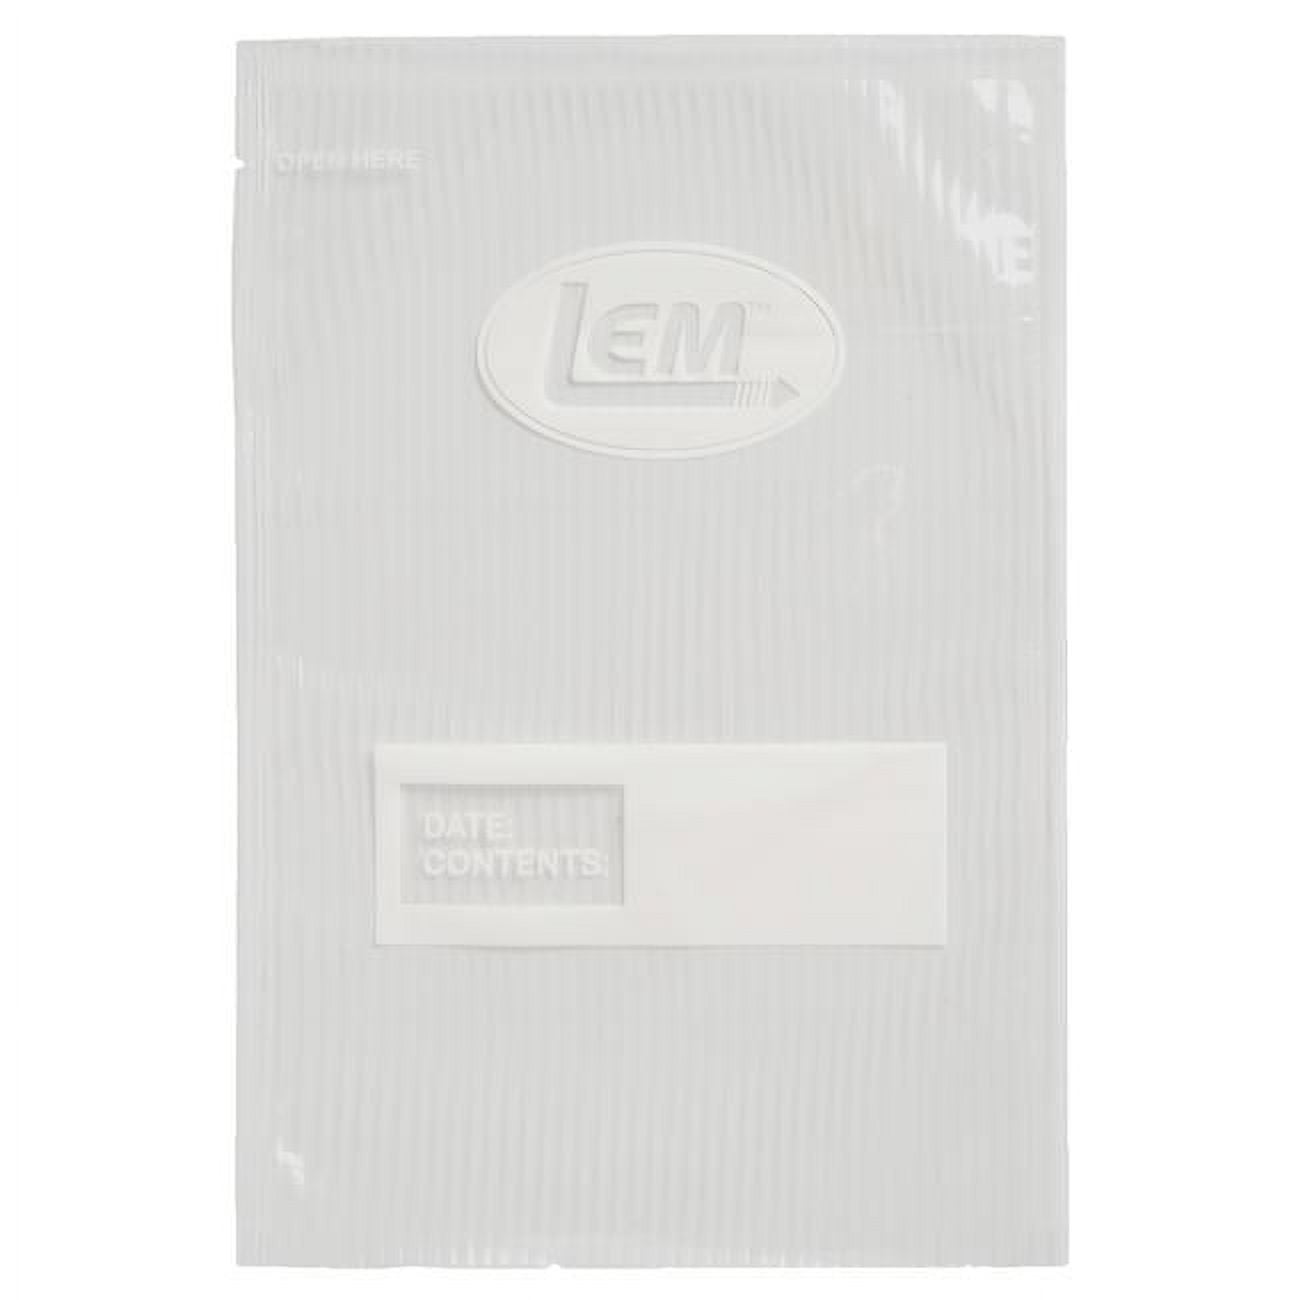 Picture of LEM Products 6014052 1 qt. MaxVac Vacuum Freezer Bags, Clear - Pack of 44